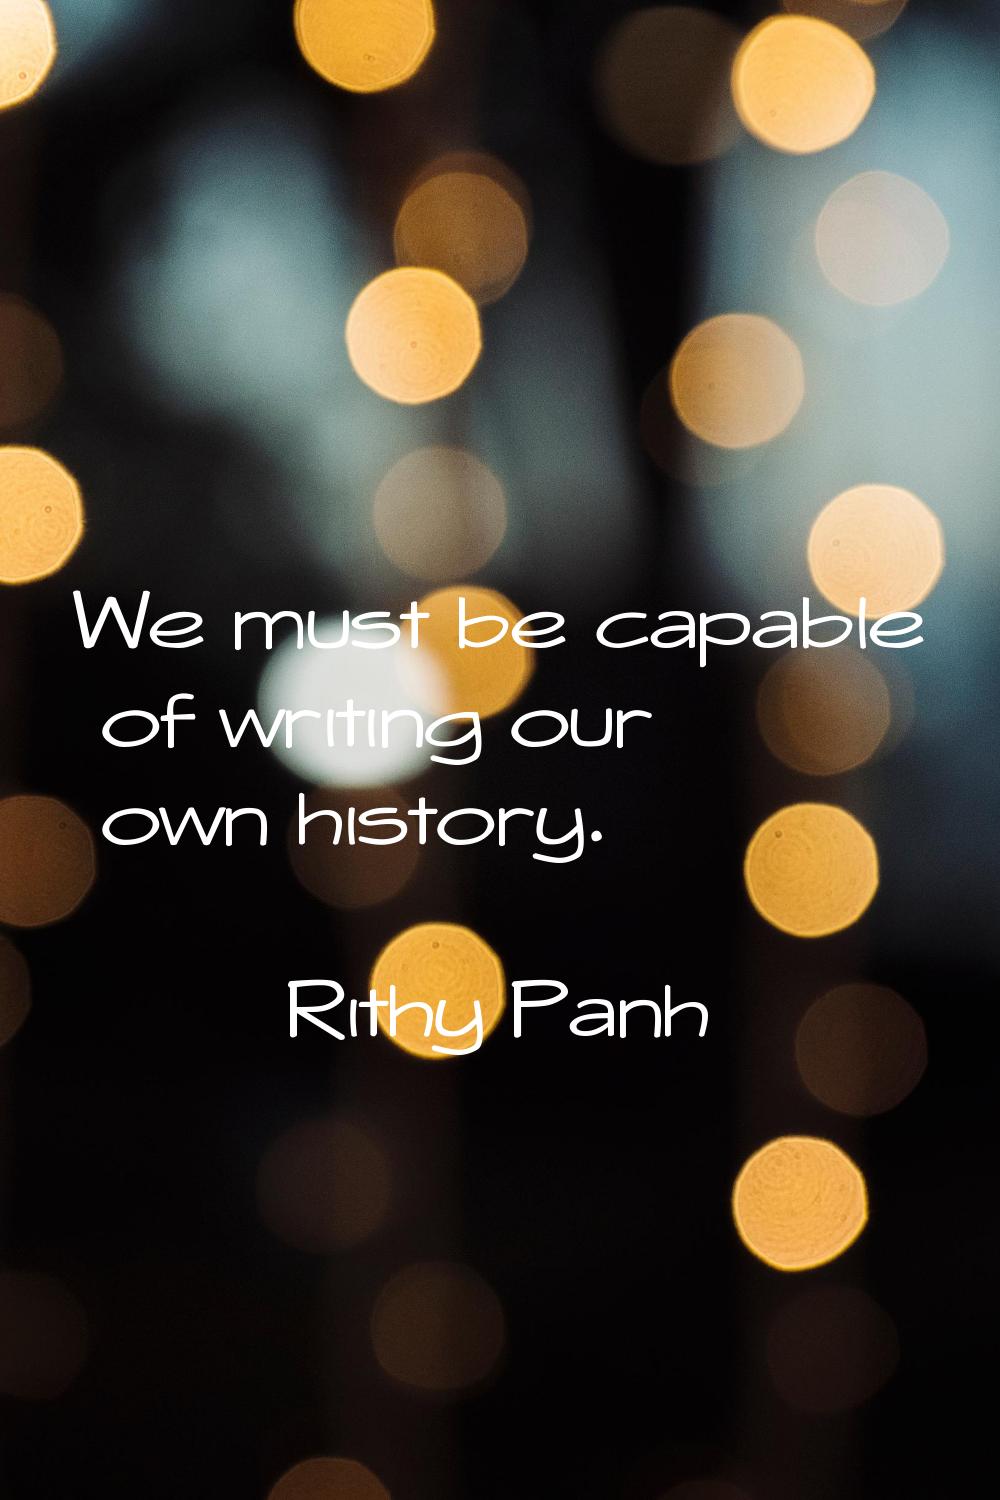 We must be capable of writing our own history.